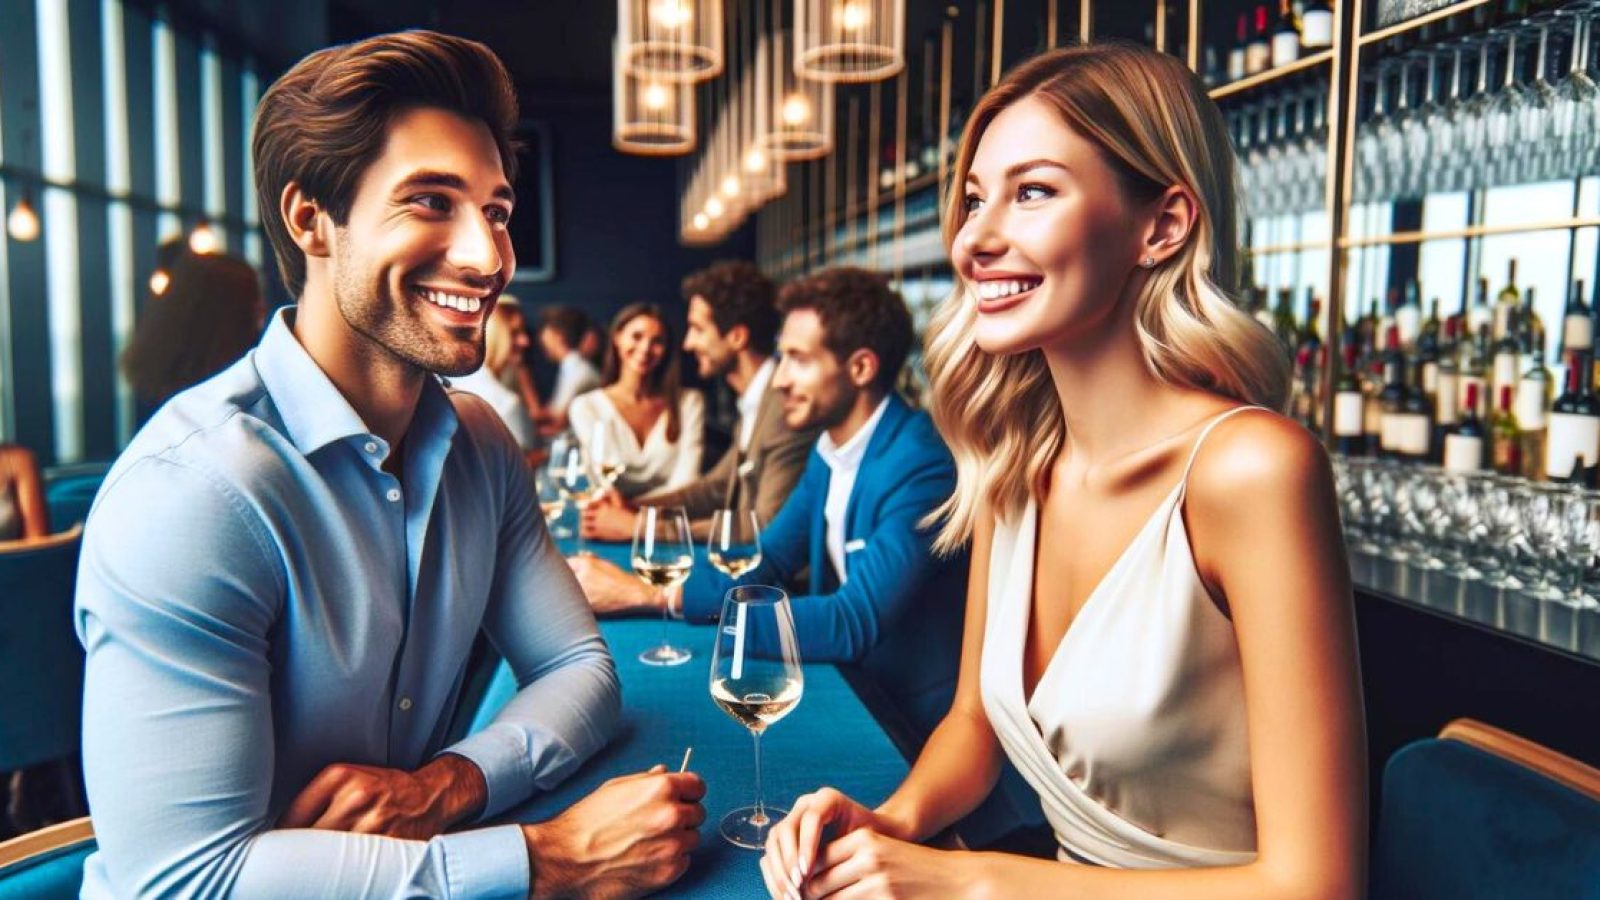 man and woman speed dating at a bar